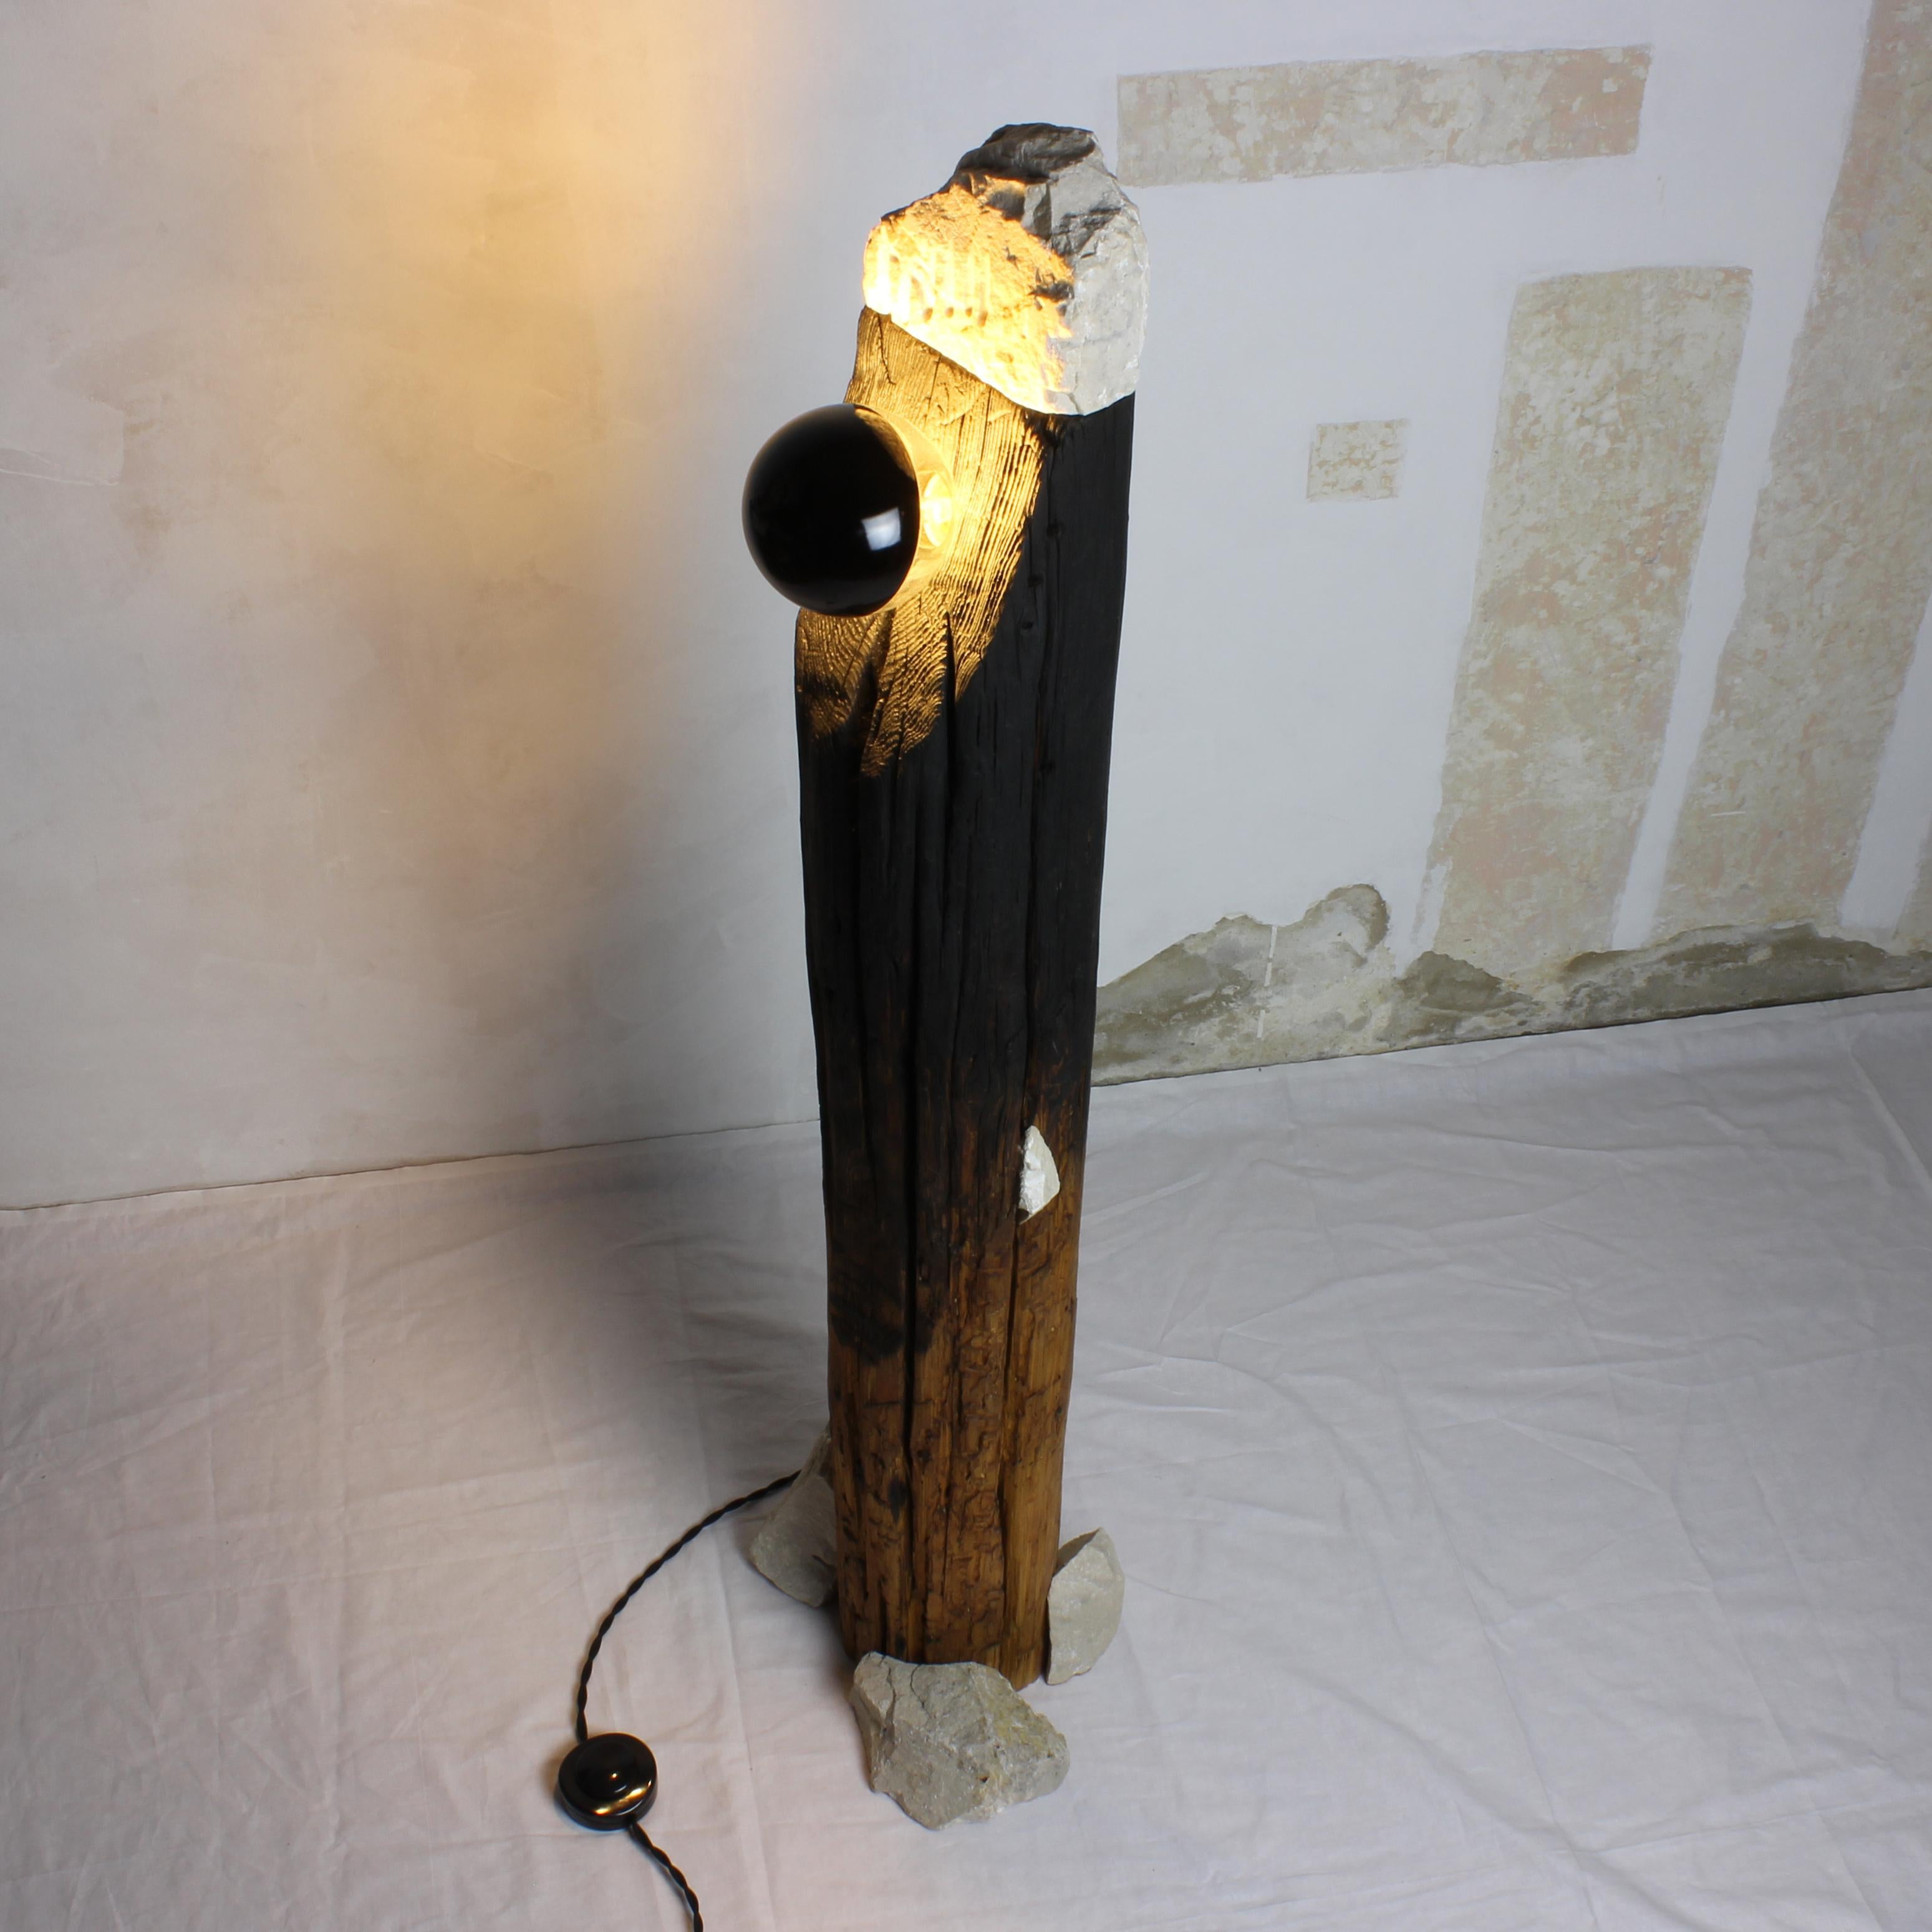 Hungarian Totem - Sculptural Lighting, Floor Lamp from Reclaimed Burned Wood and Stone For Sale